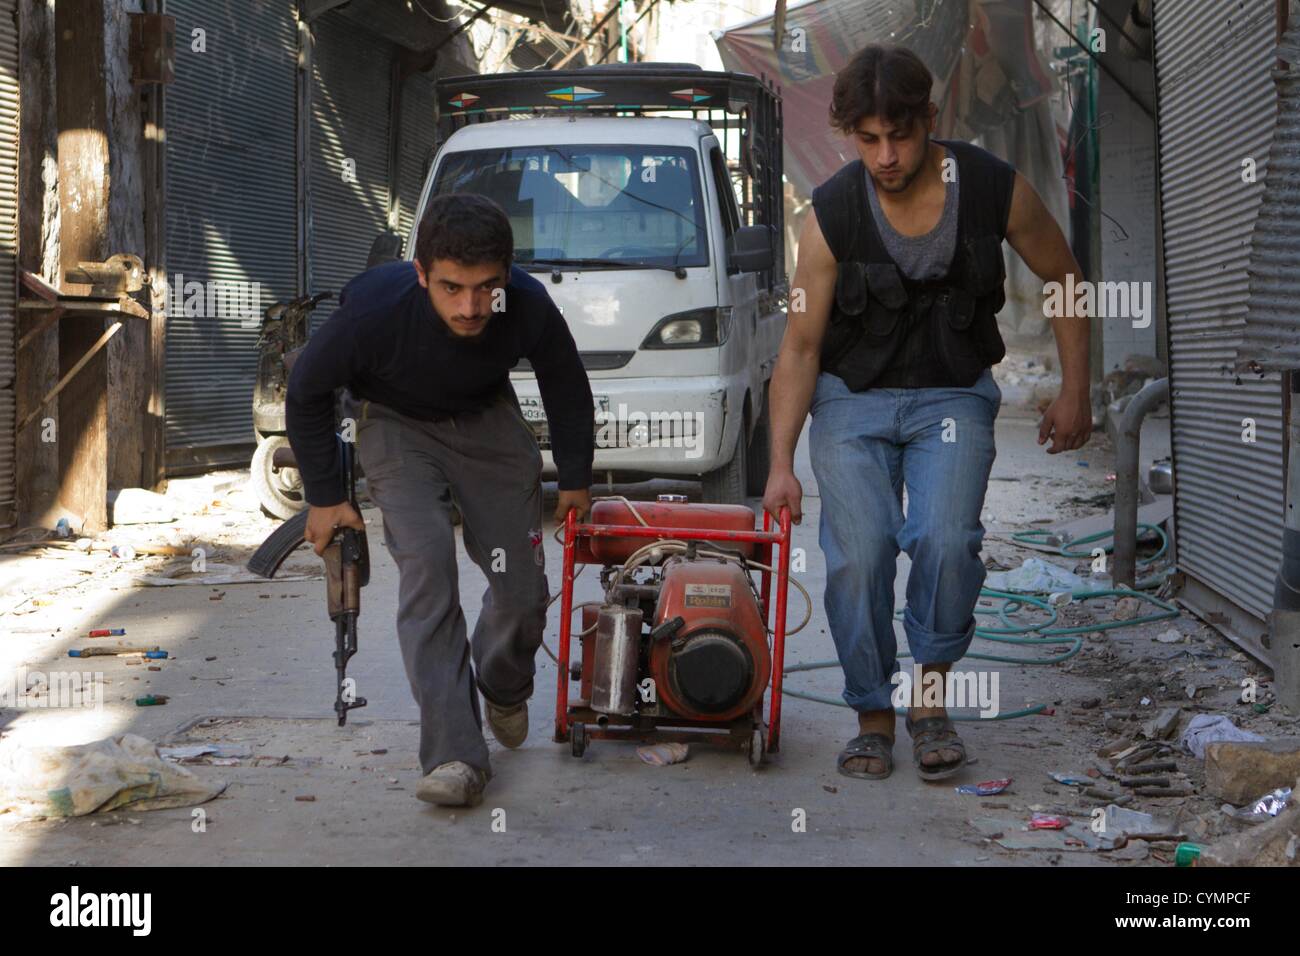 November 5, 2012 - Aleppo, Syria:  Free Syrian Army Fighter carry a generator to a location where injured fighters area trapped in the Old City. They needed to cut through a concrete wall to avoid sniper fire which killed one in a rescuer attempt. Stock Photo